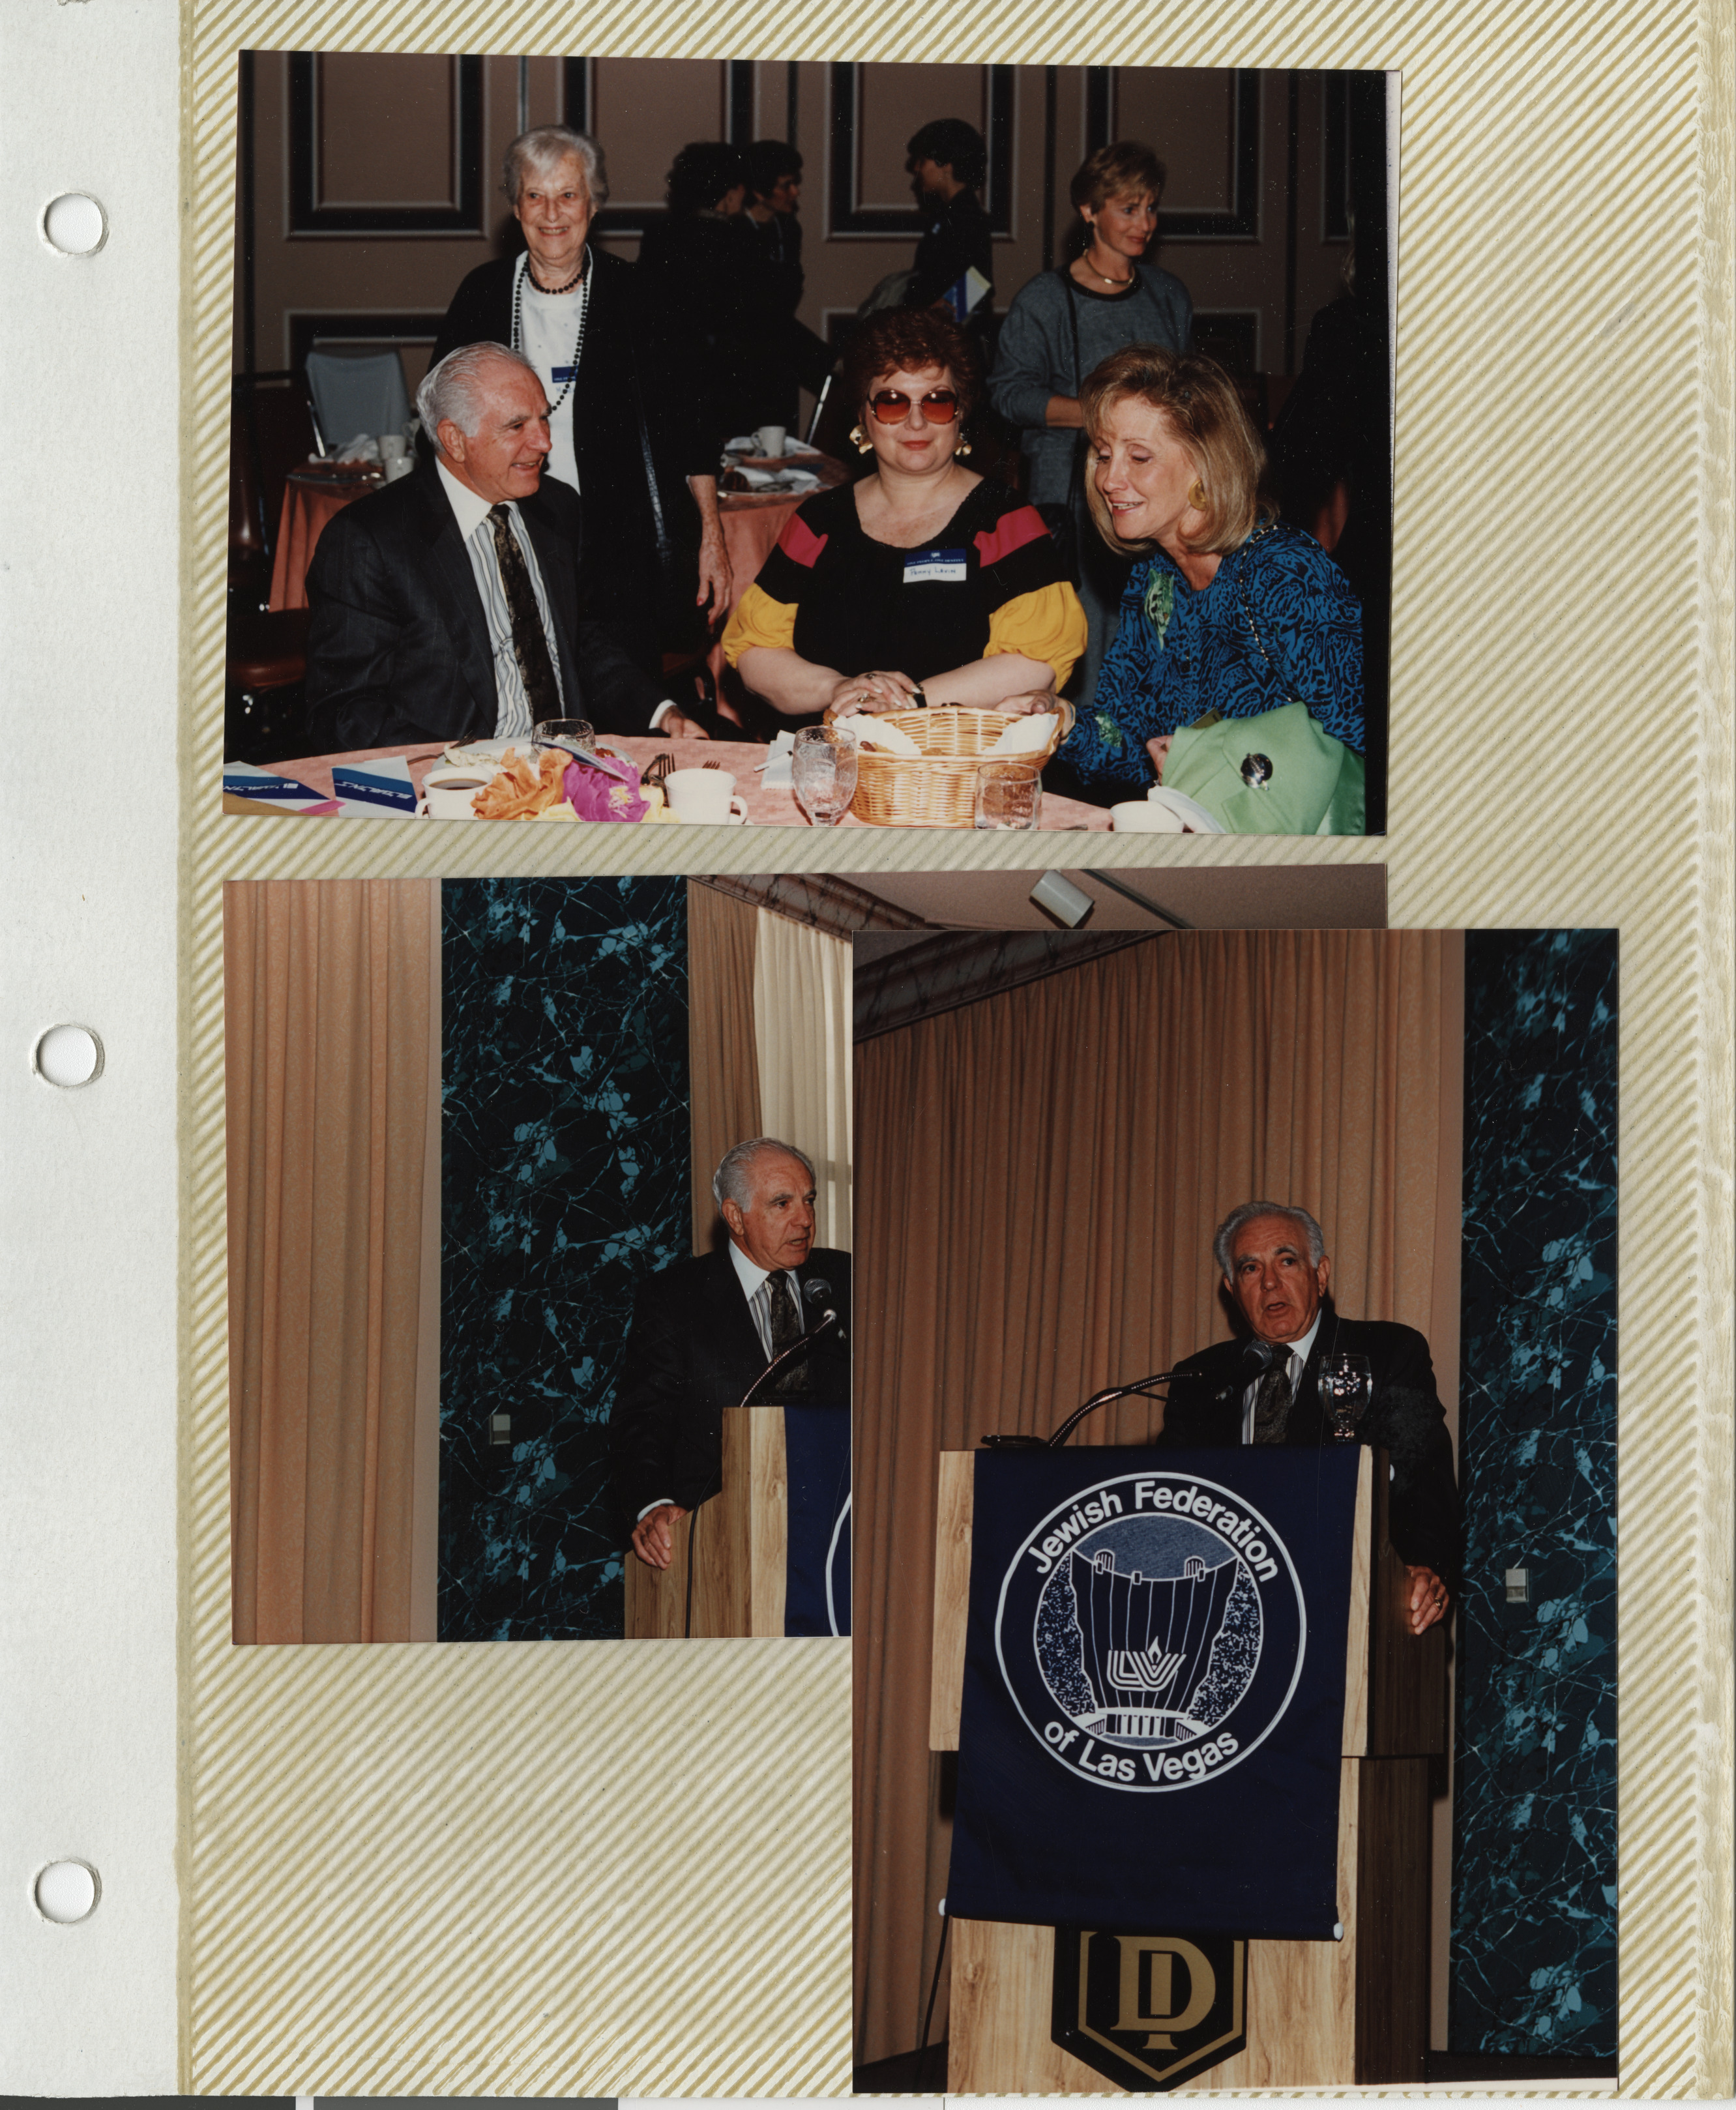 Photograph of event hosted by the Jewish Federation of Las Vegas, 1987-1989